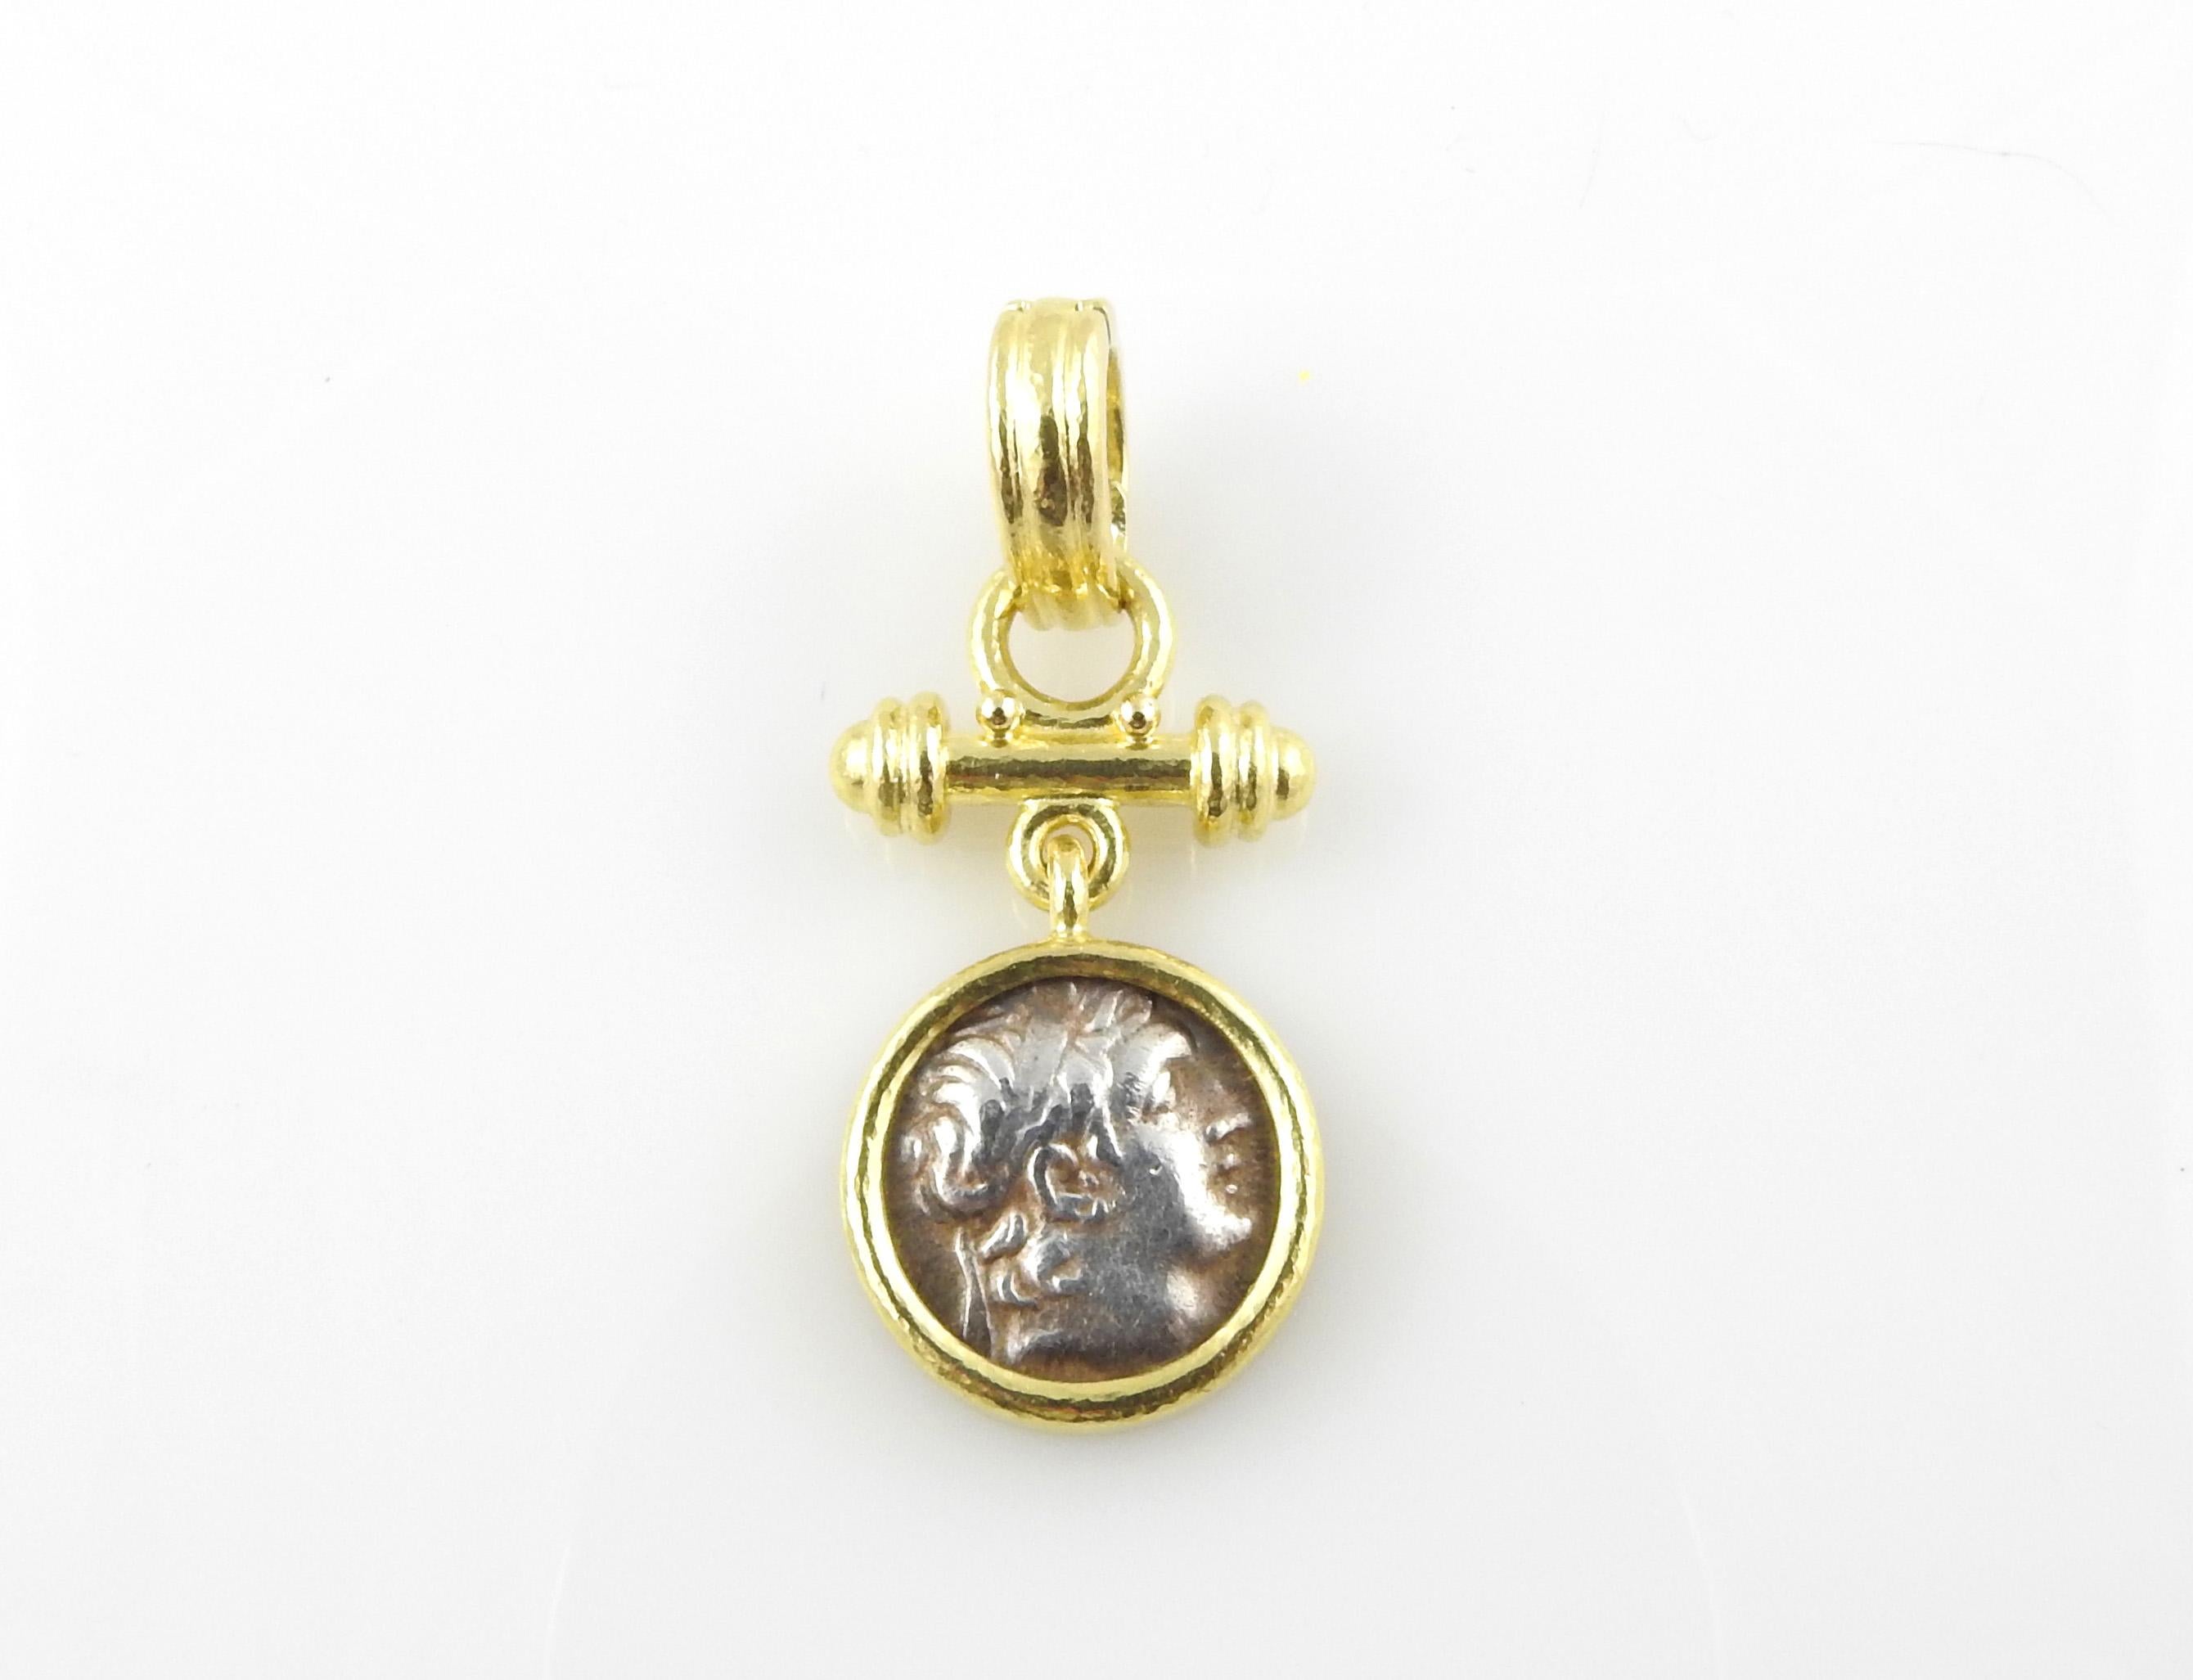 Elizabeth Locke 19K Hammered Yellow Gold Ancient Coin Pendant/ Enhancer

This unique pendant/enhancer is approx. 1 3/4